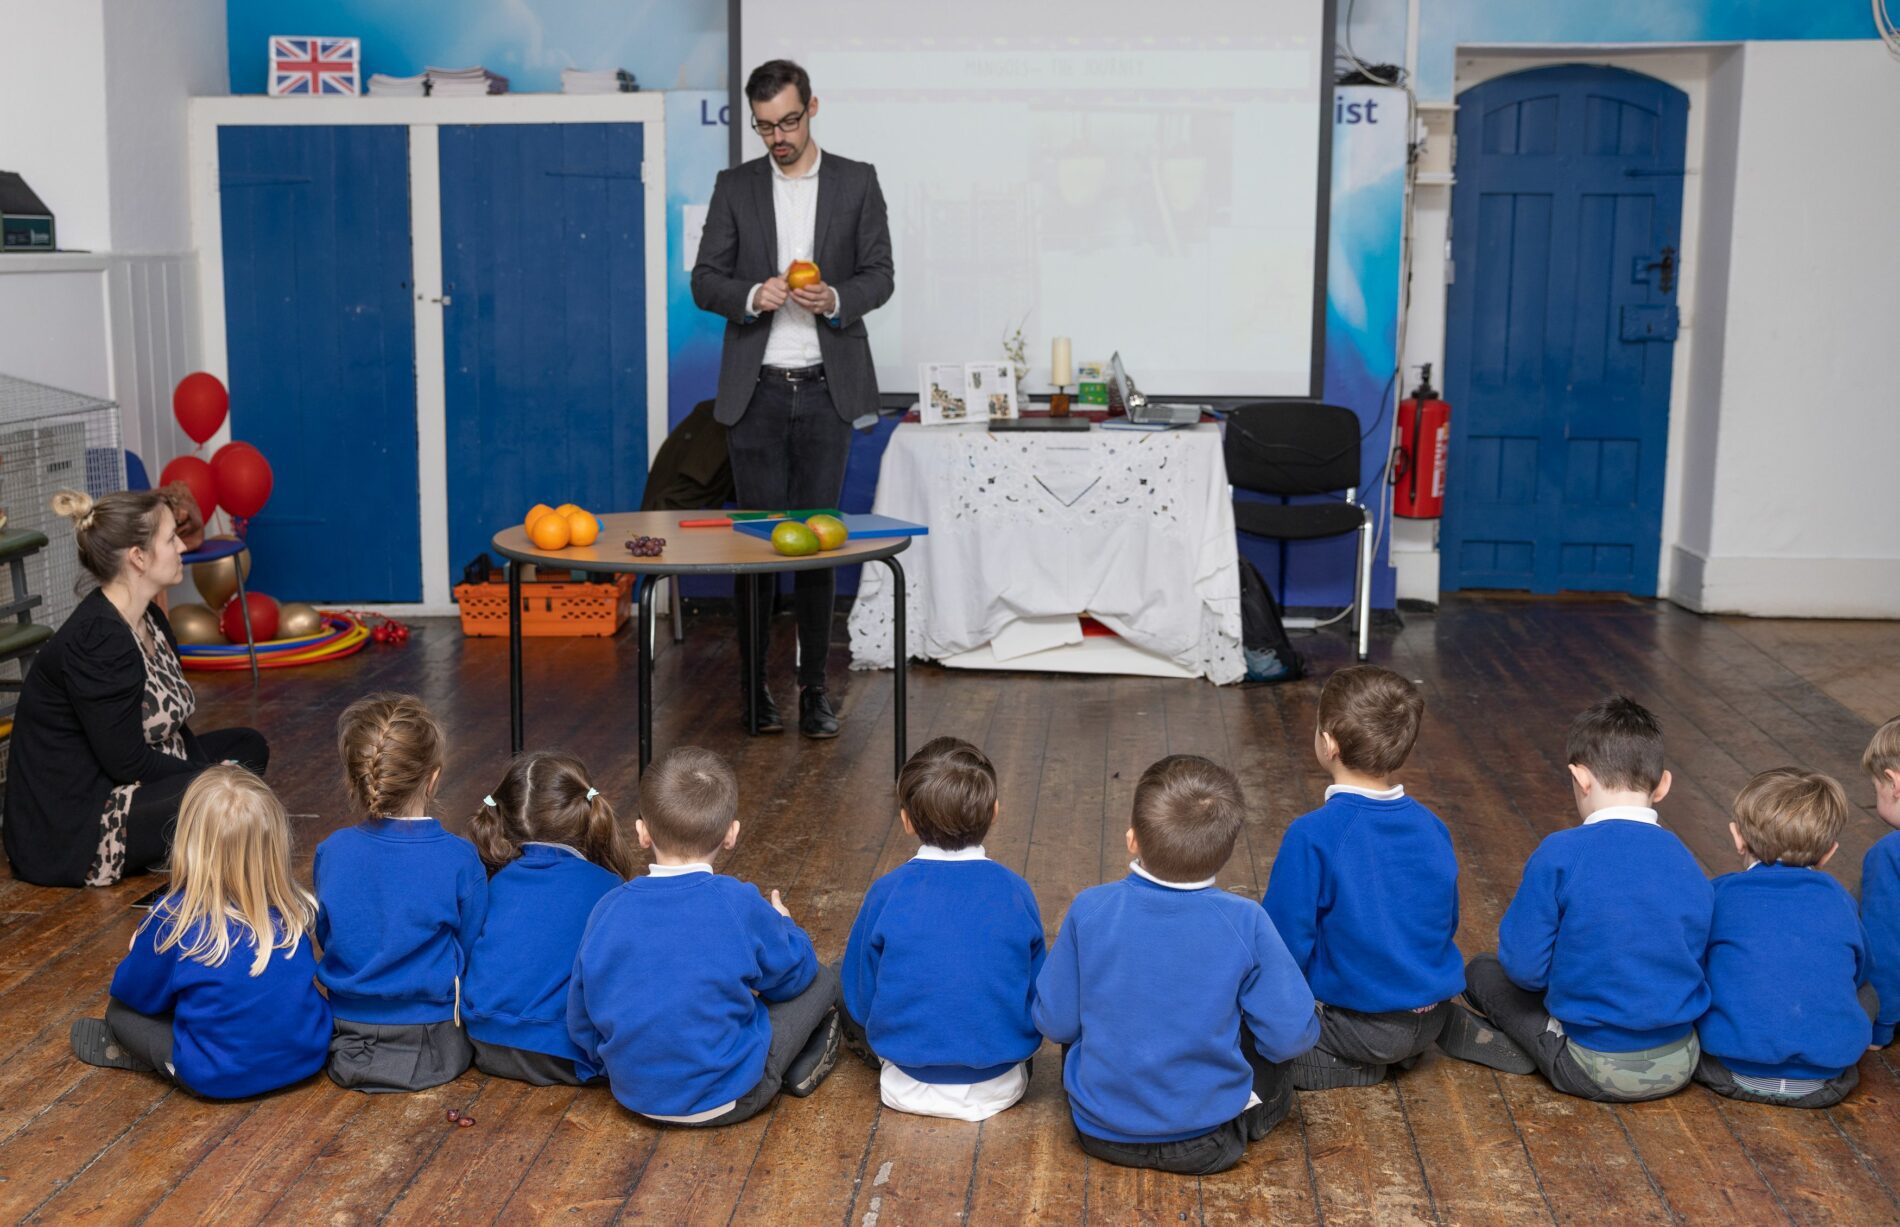 pupils sat on the floor looking at a man talking and demonstrating preparing fruit